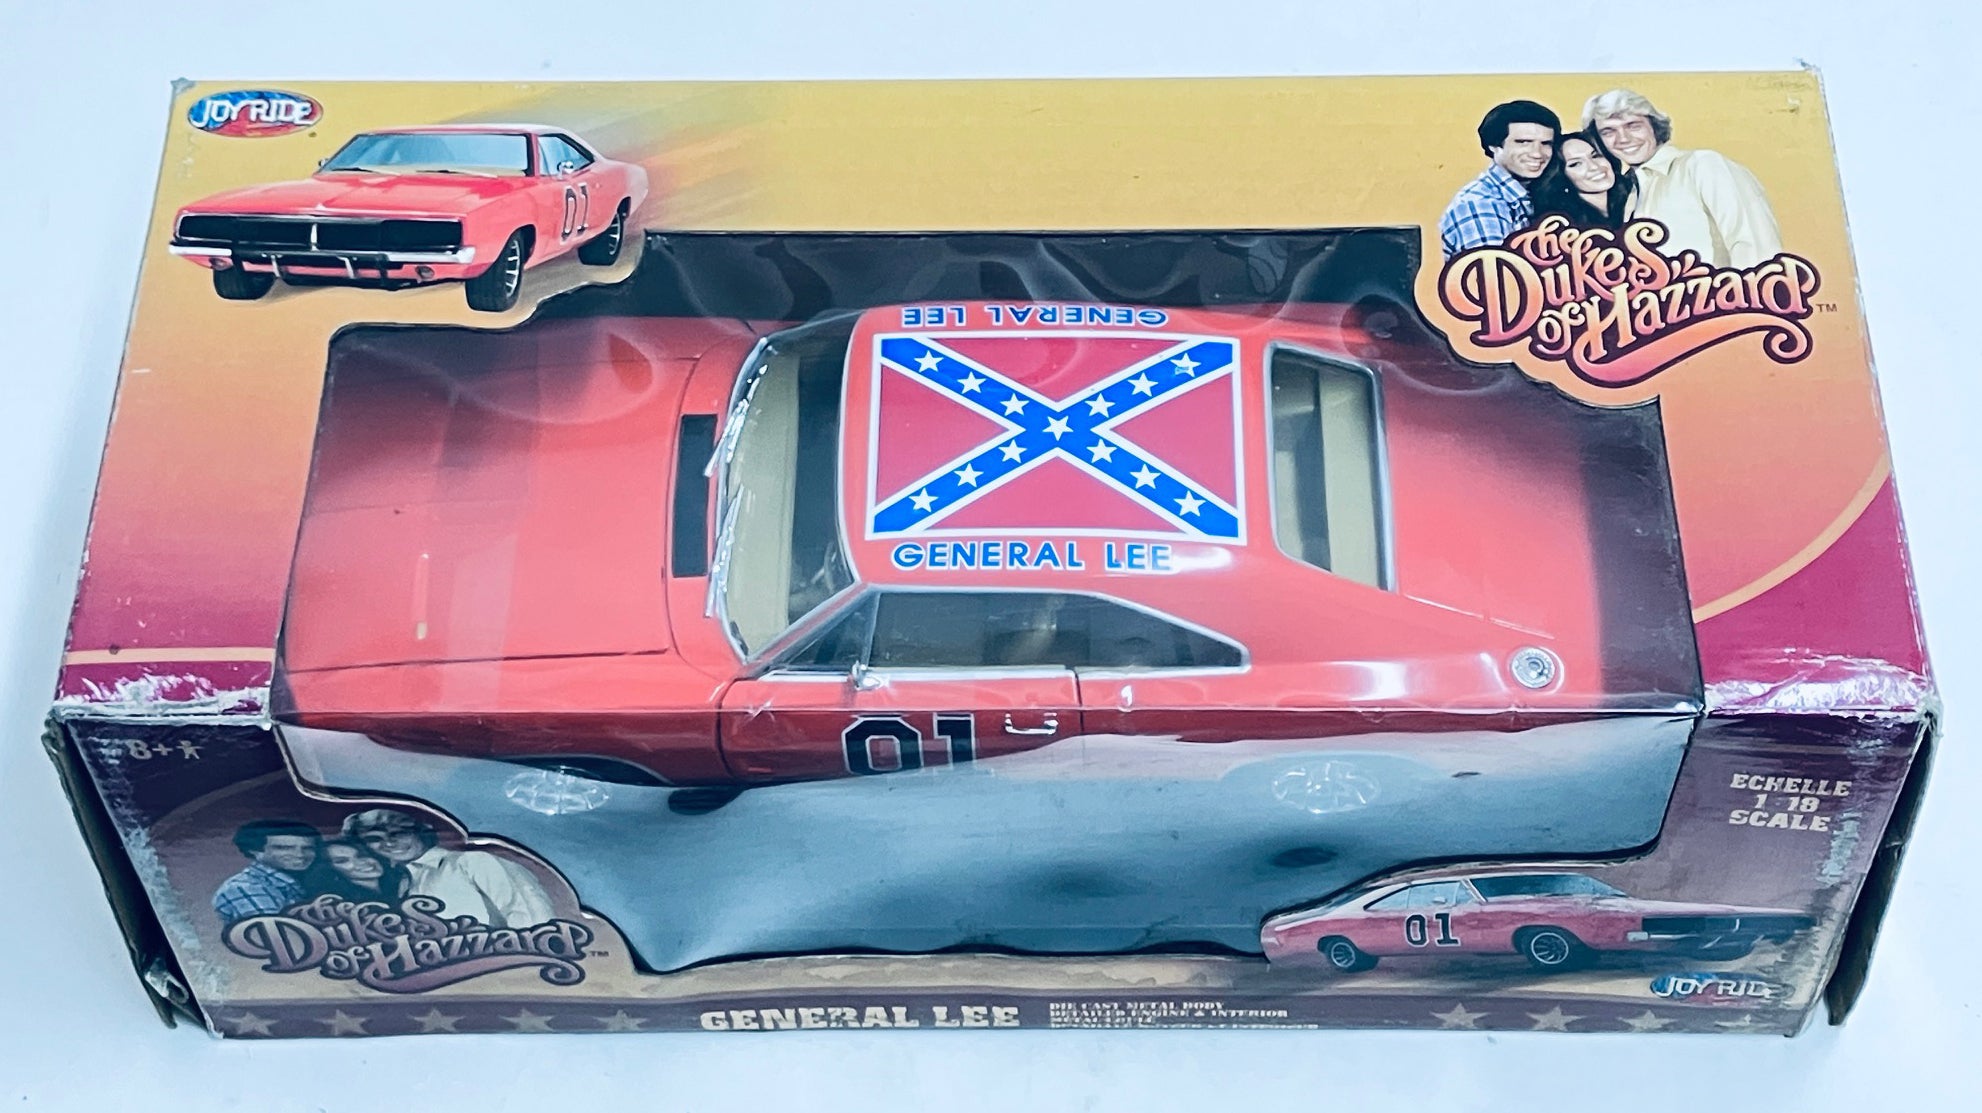 Joyride 1/18 General Lee Dukes Of Hazzard 1969 Dodge Charger 32485 